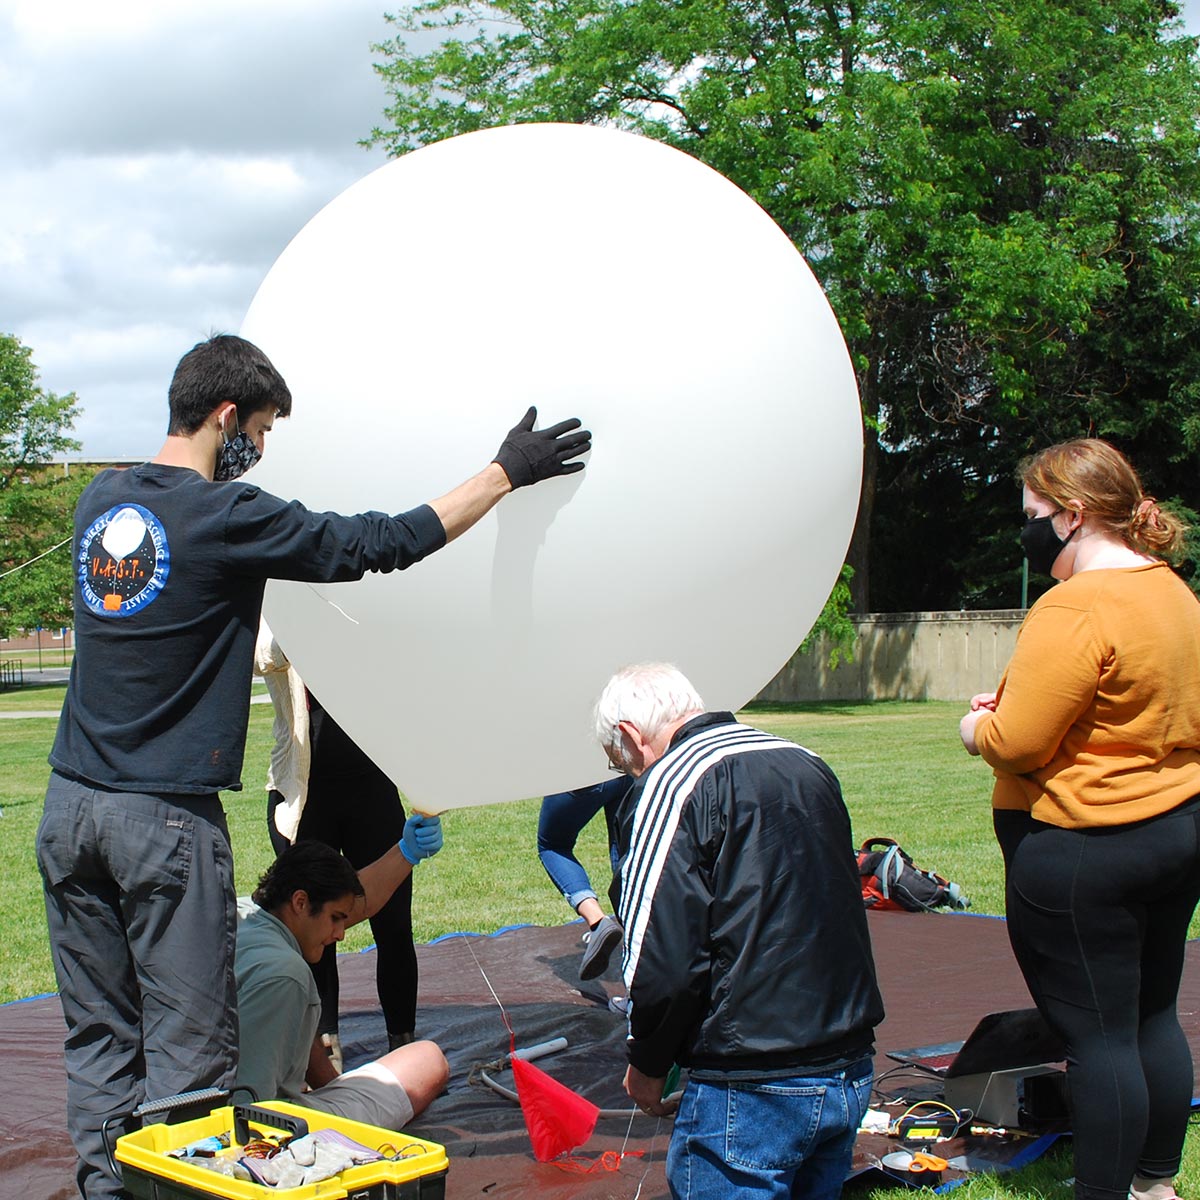 U of I engineering students are using high-altitude balloons